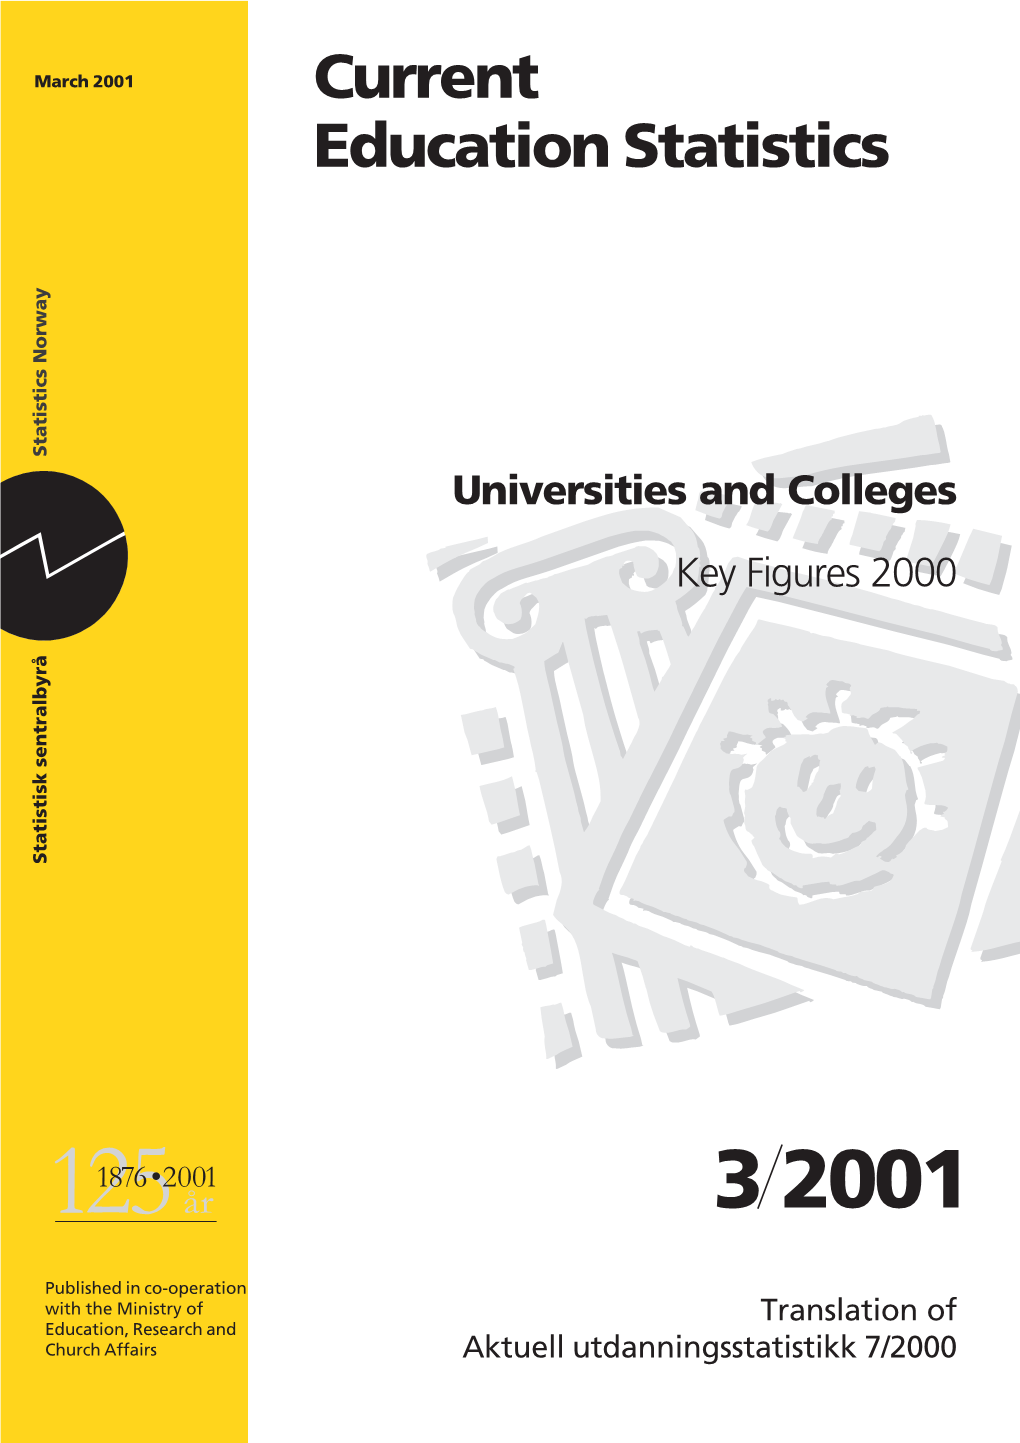 Universities and Colleges Key Figures 2000